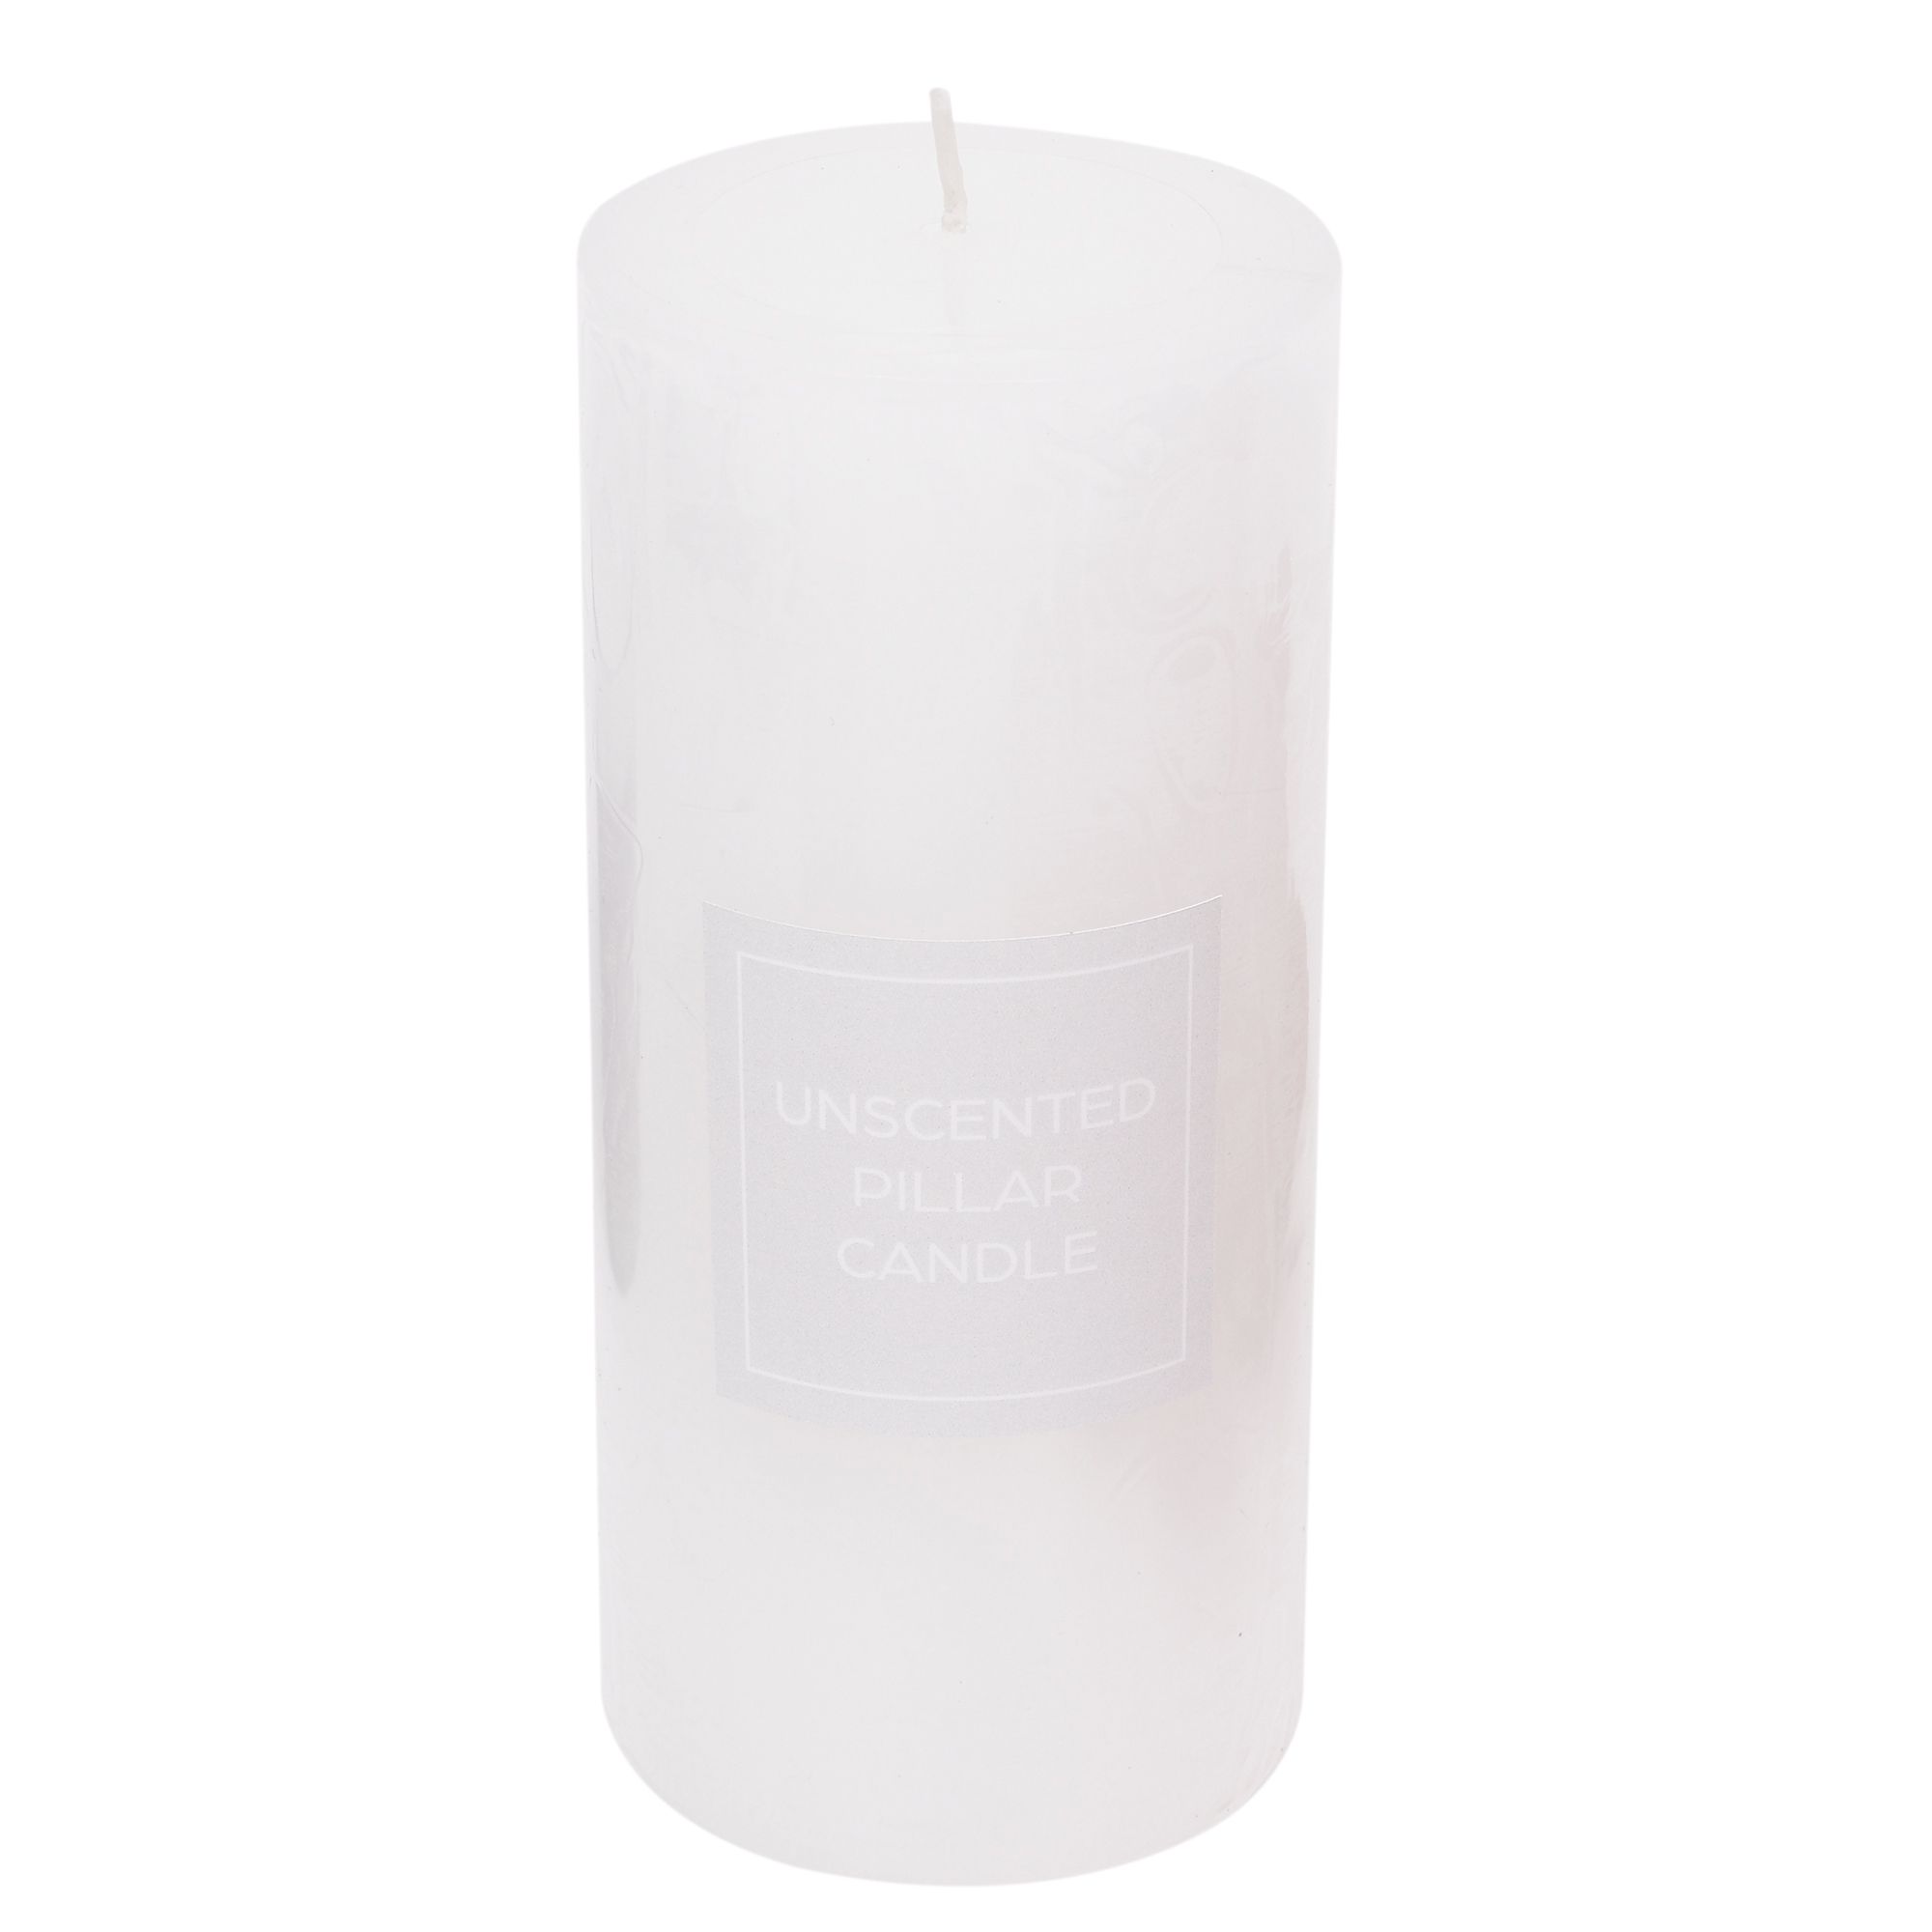 White Unscented Pillar candle 475g, Large